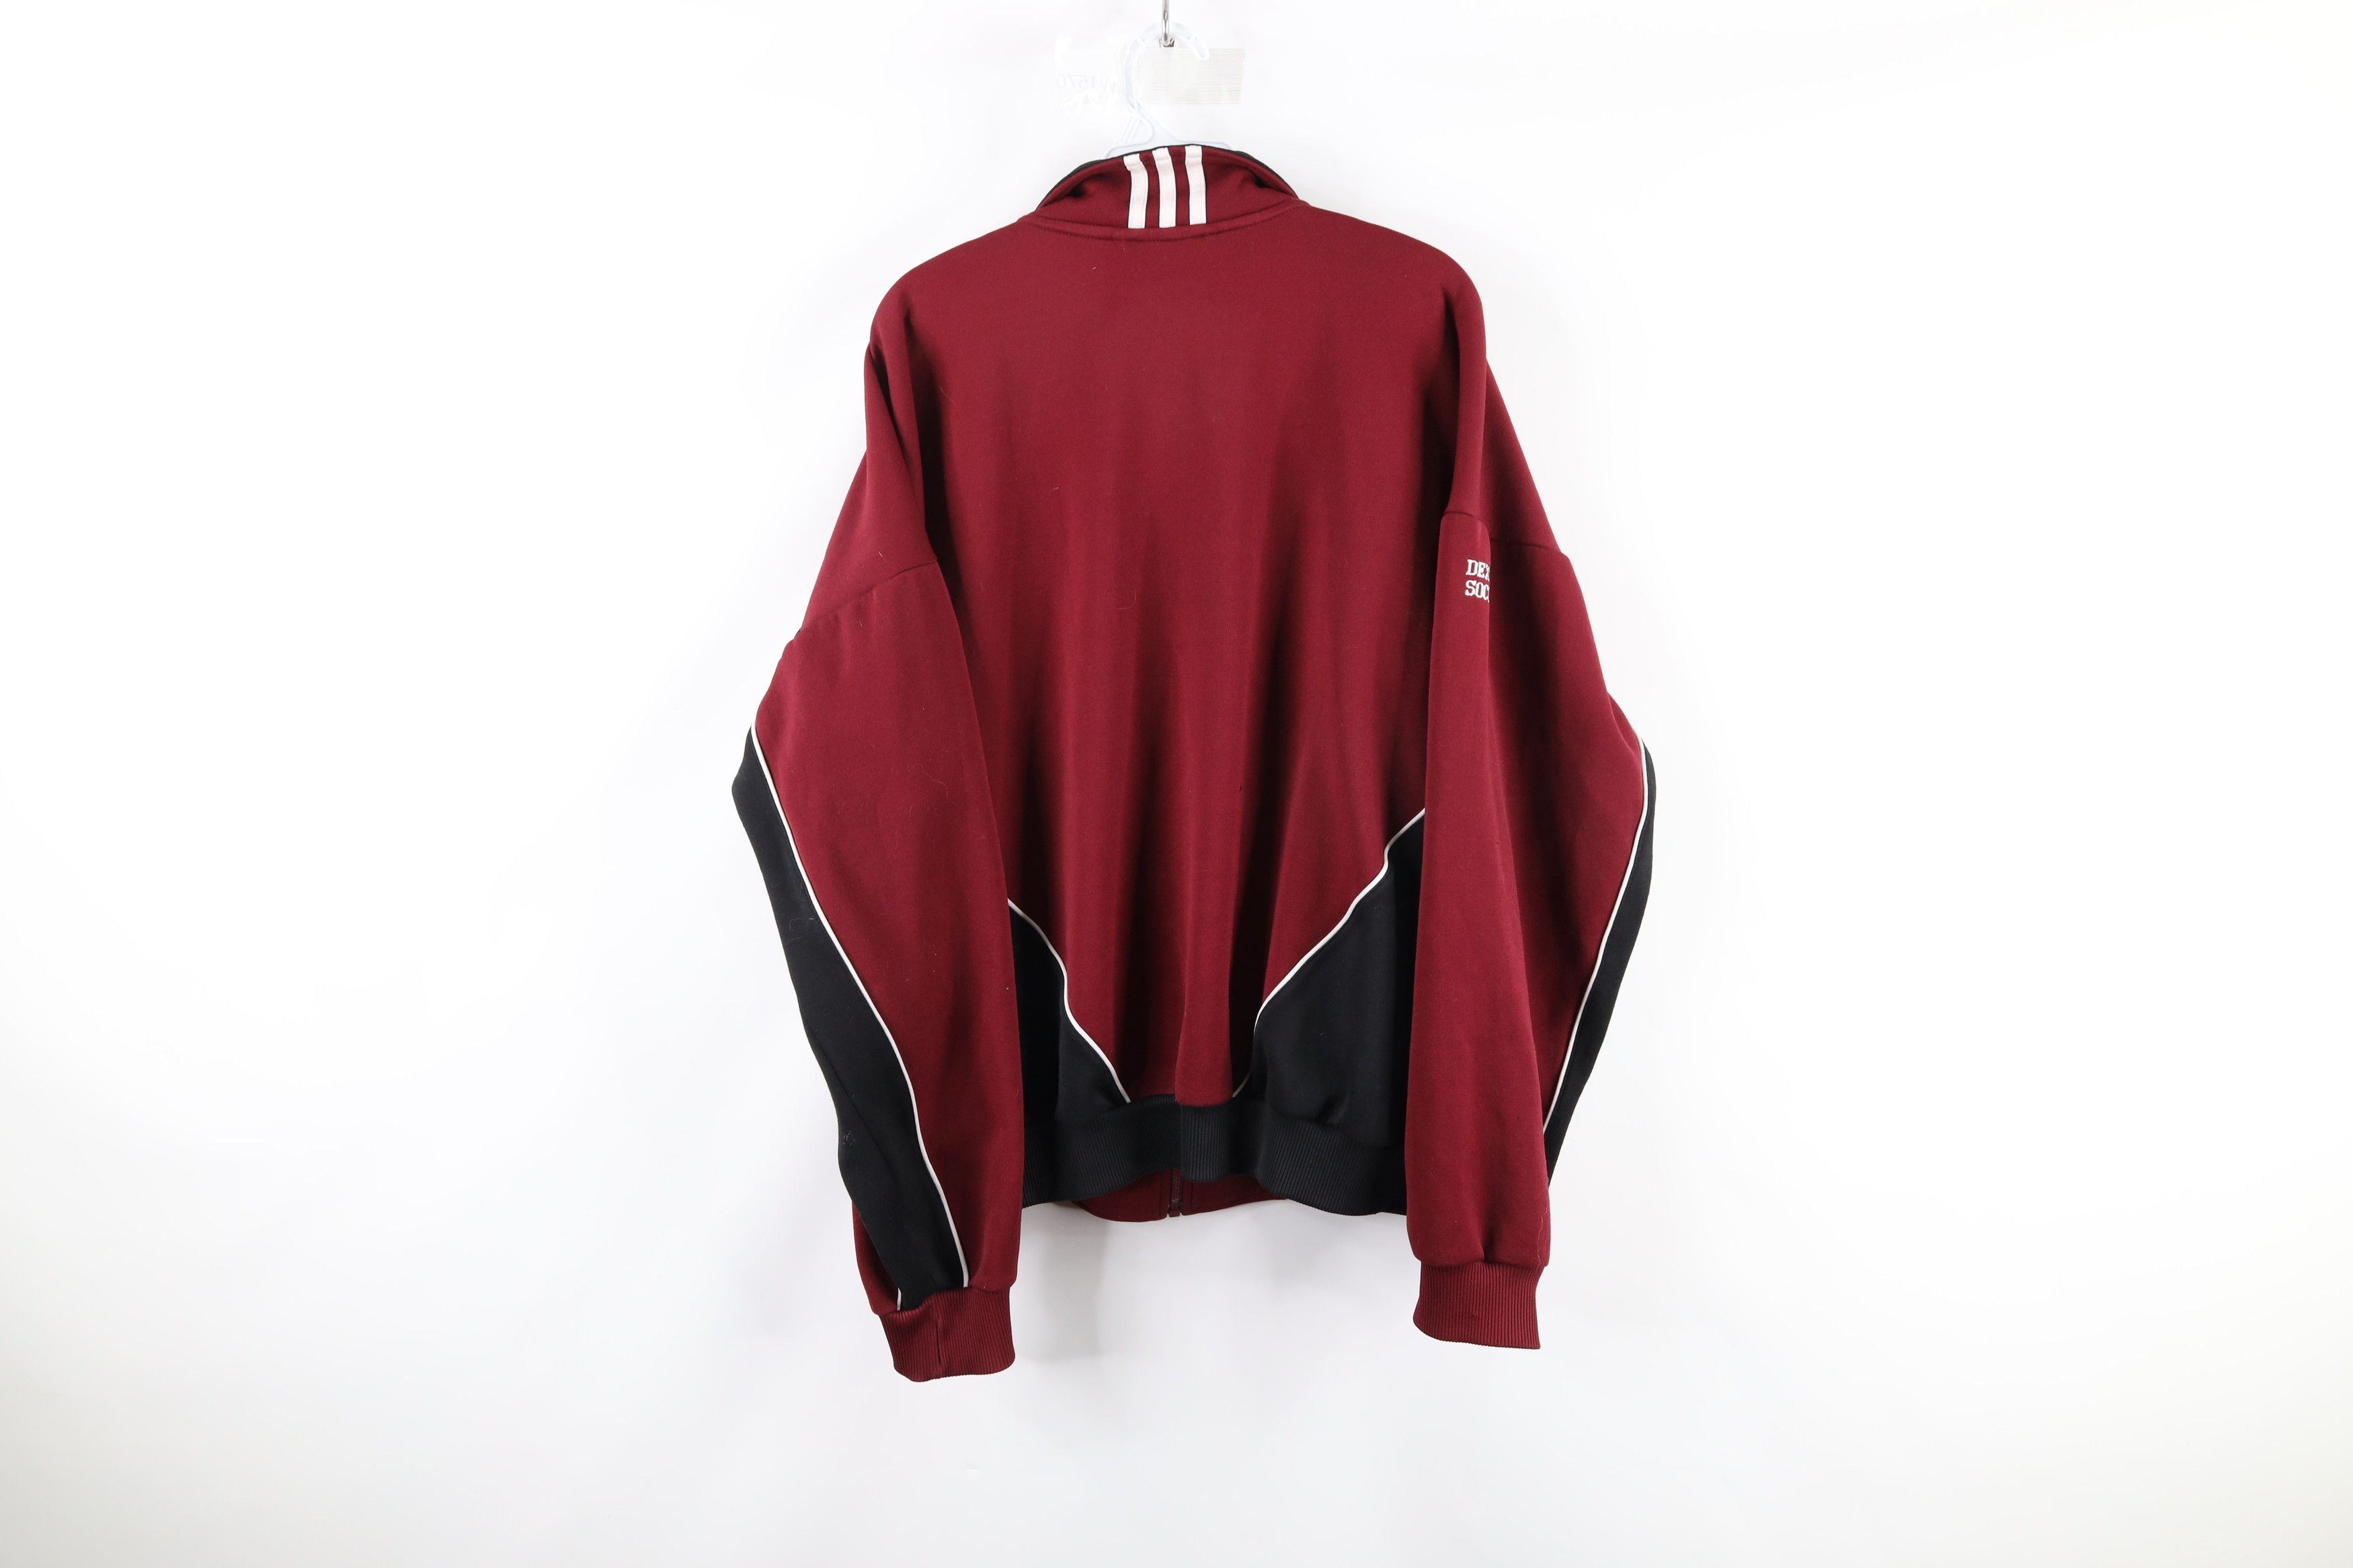 Adidas Vintage Adidas Spell Out Striped Soccer Warm Up Jacket Size US L / EU 52-54 / 3 - 10 Thumbnail